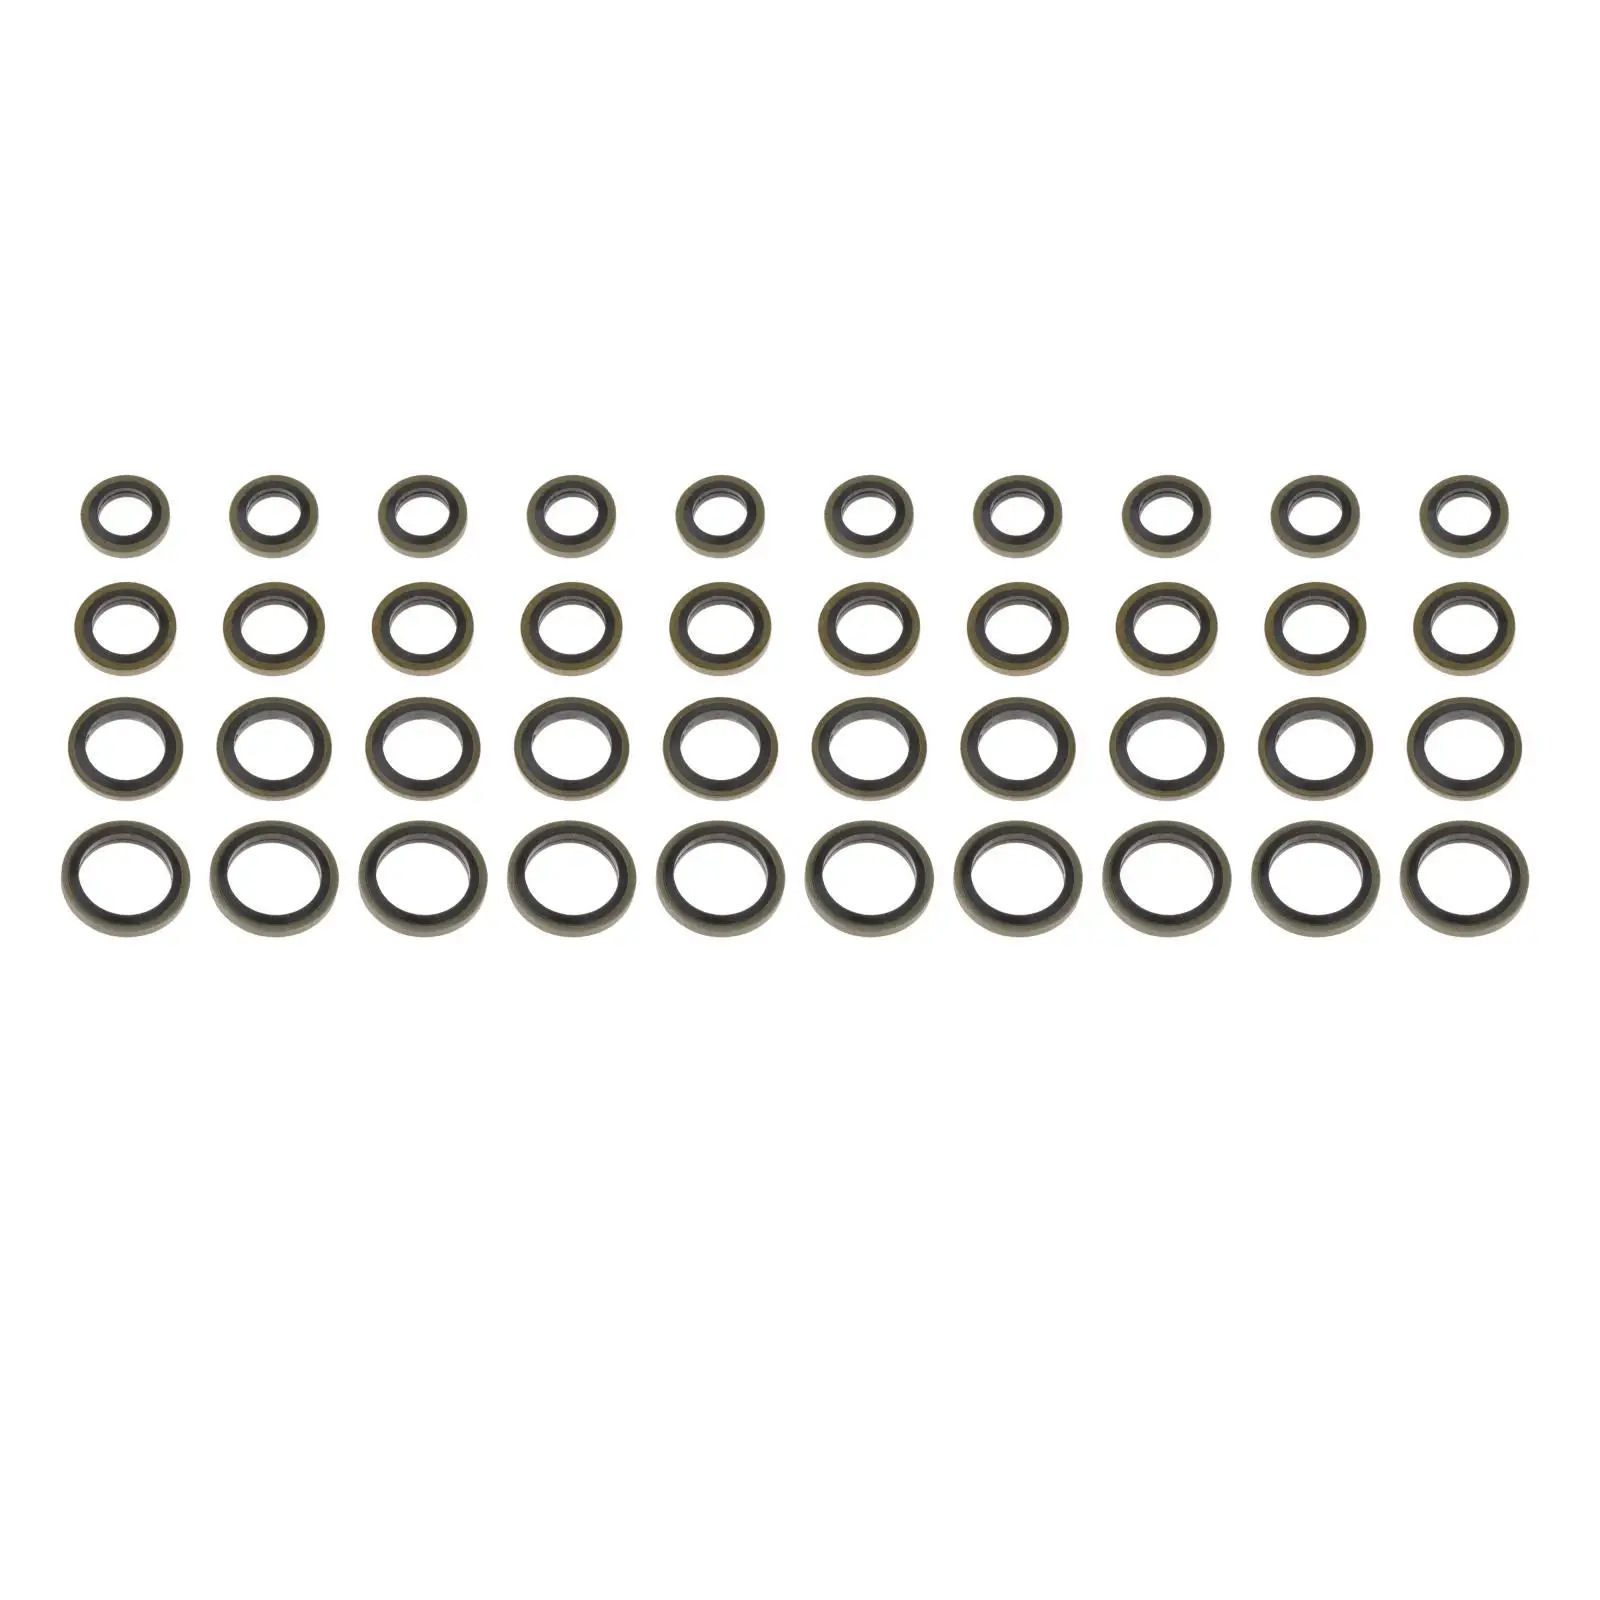 Bolt Fuel Sealing Washers Stable Washer Set for Automotive Replacement